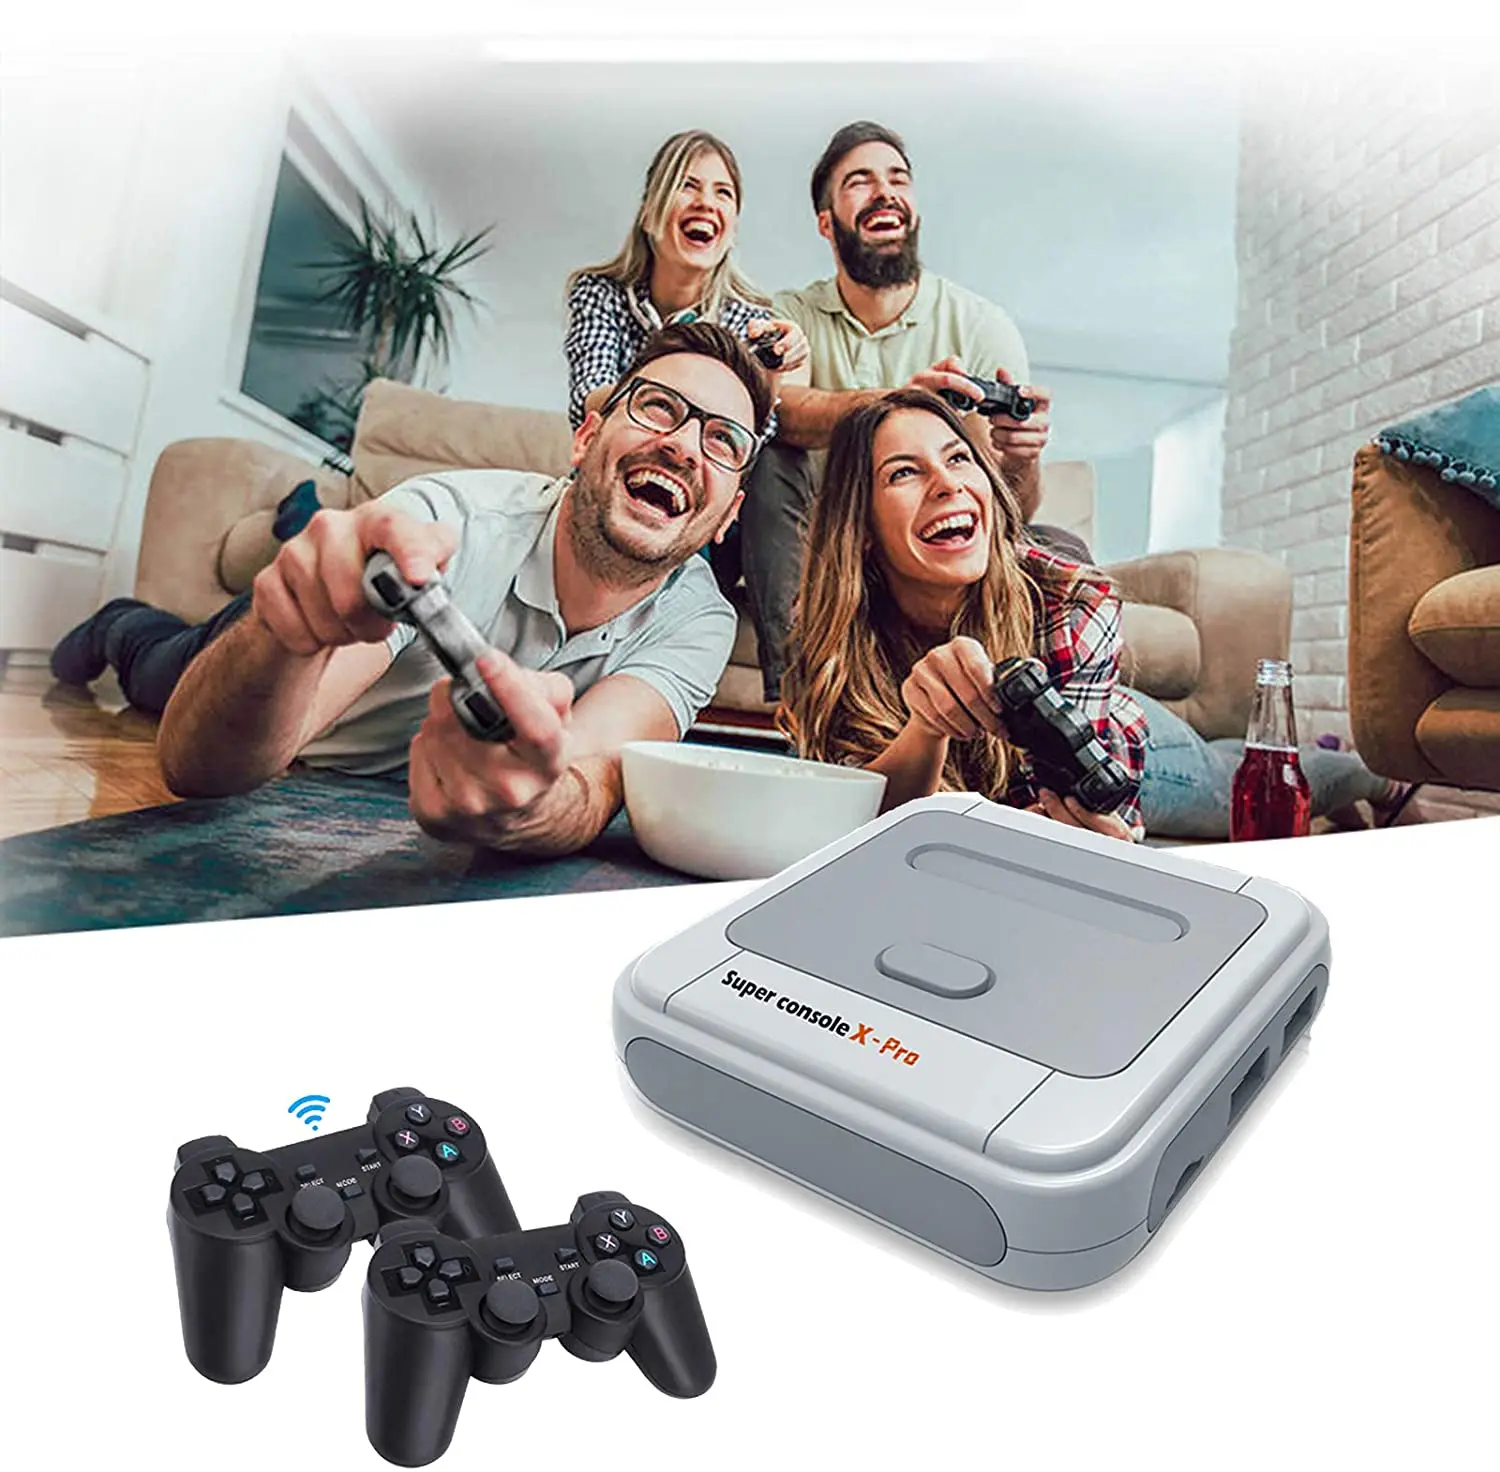 

Super Console X Pro Classic Retro Game Console Built-in 50,000+ Games Dual Systems Gaming Consoles for 4K TV HD Output